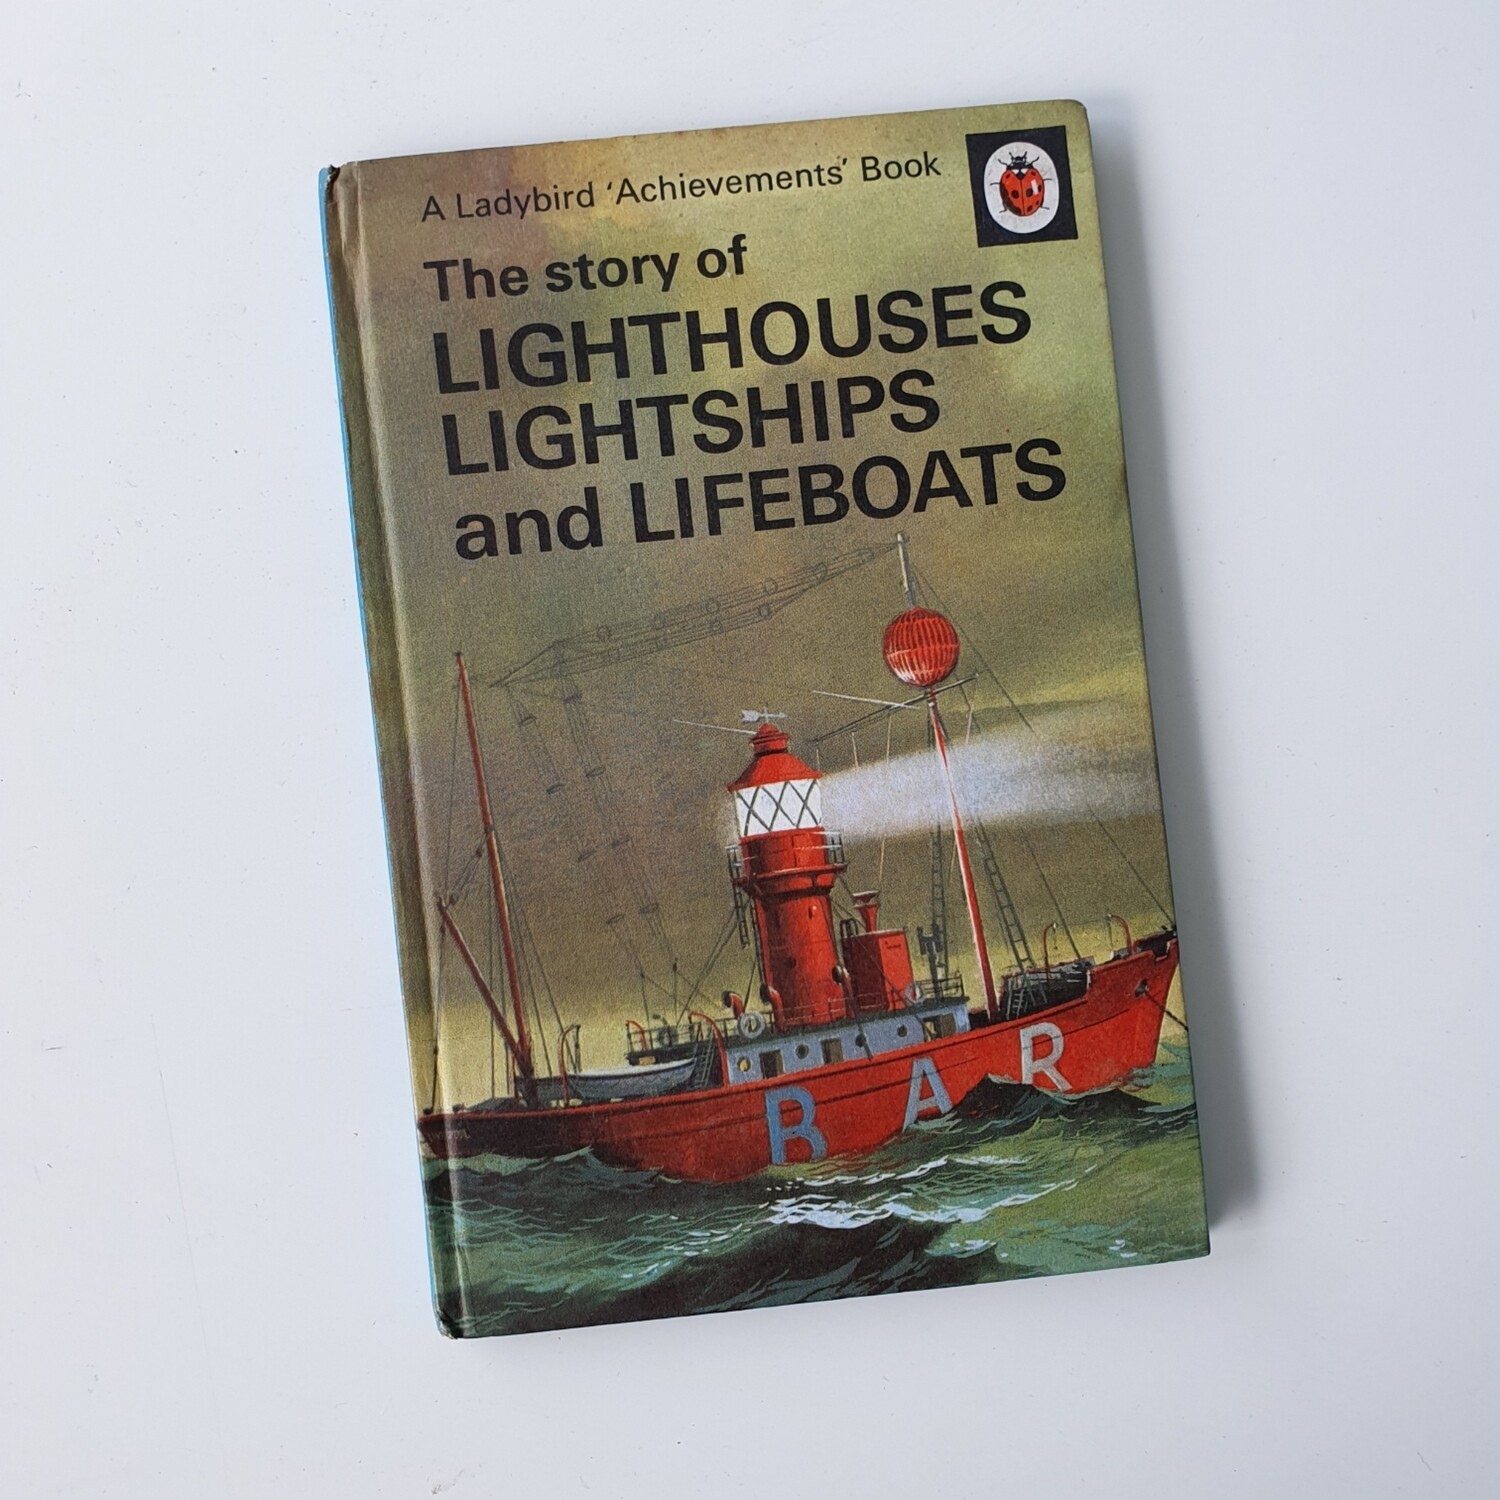 Lighthouses, Lightships and Lifeboats Notebook - Ladybird book